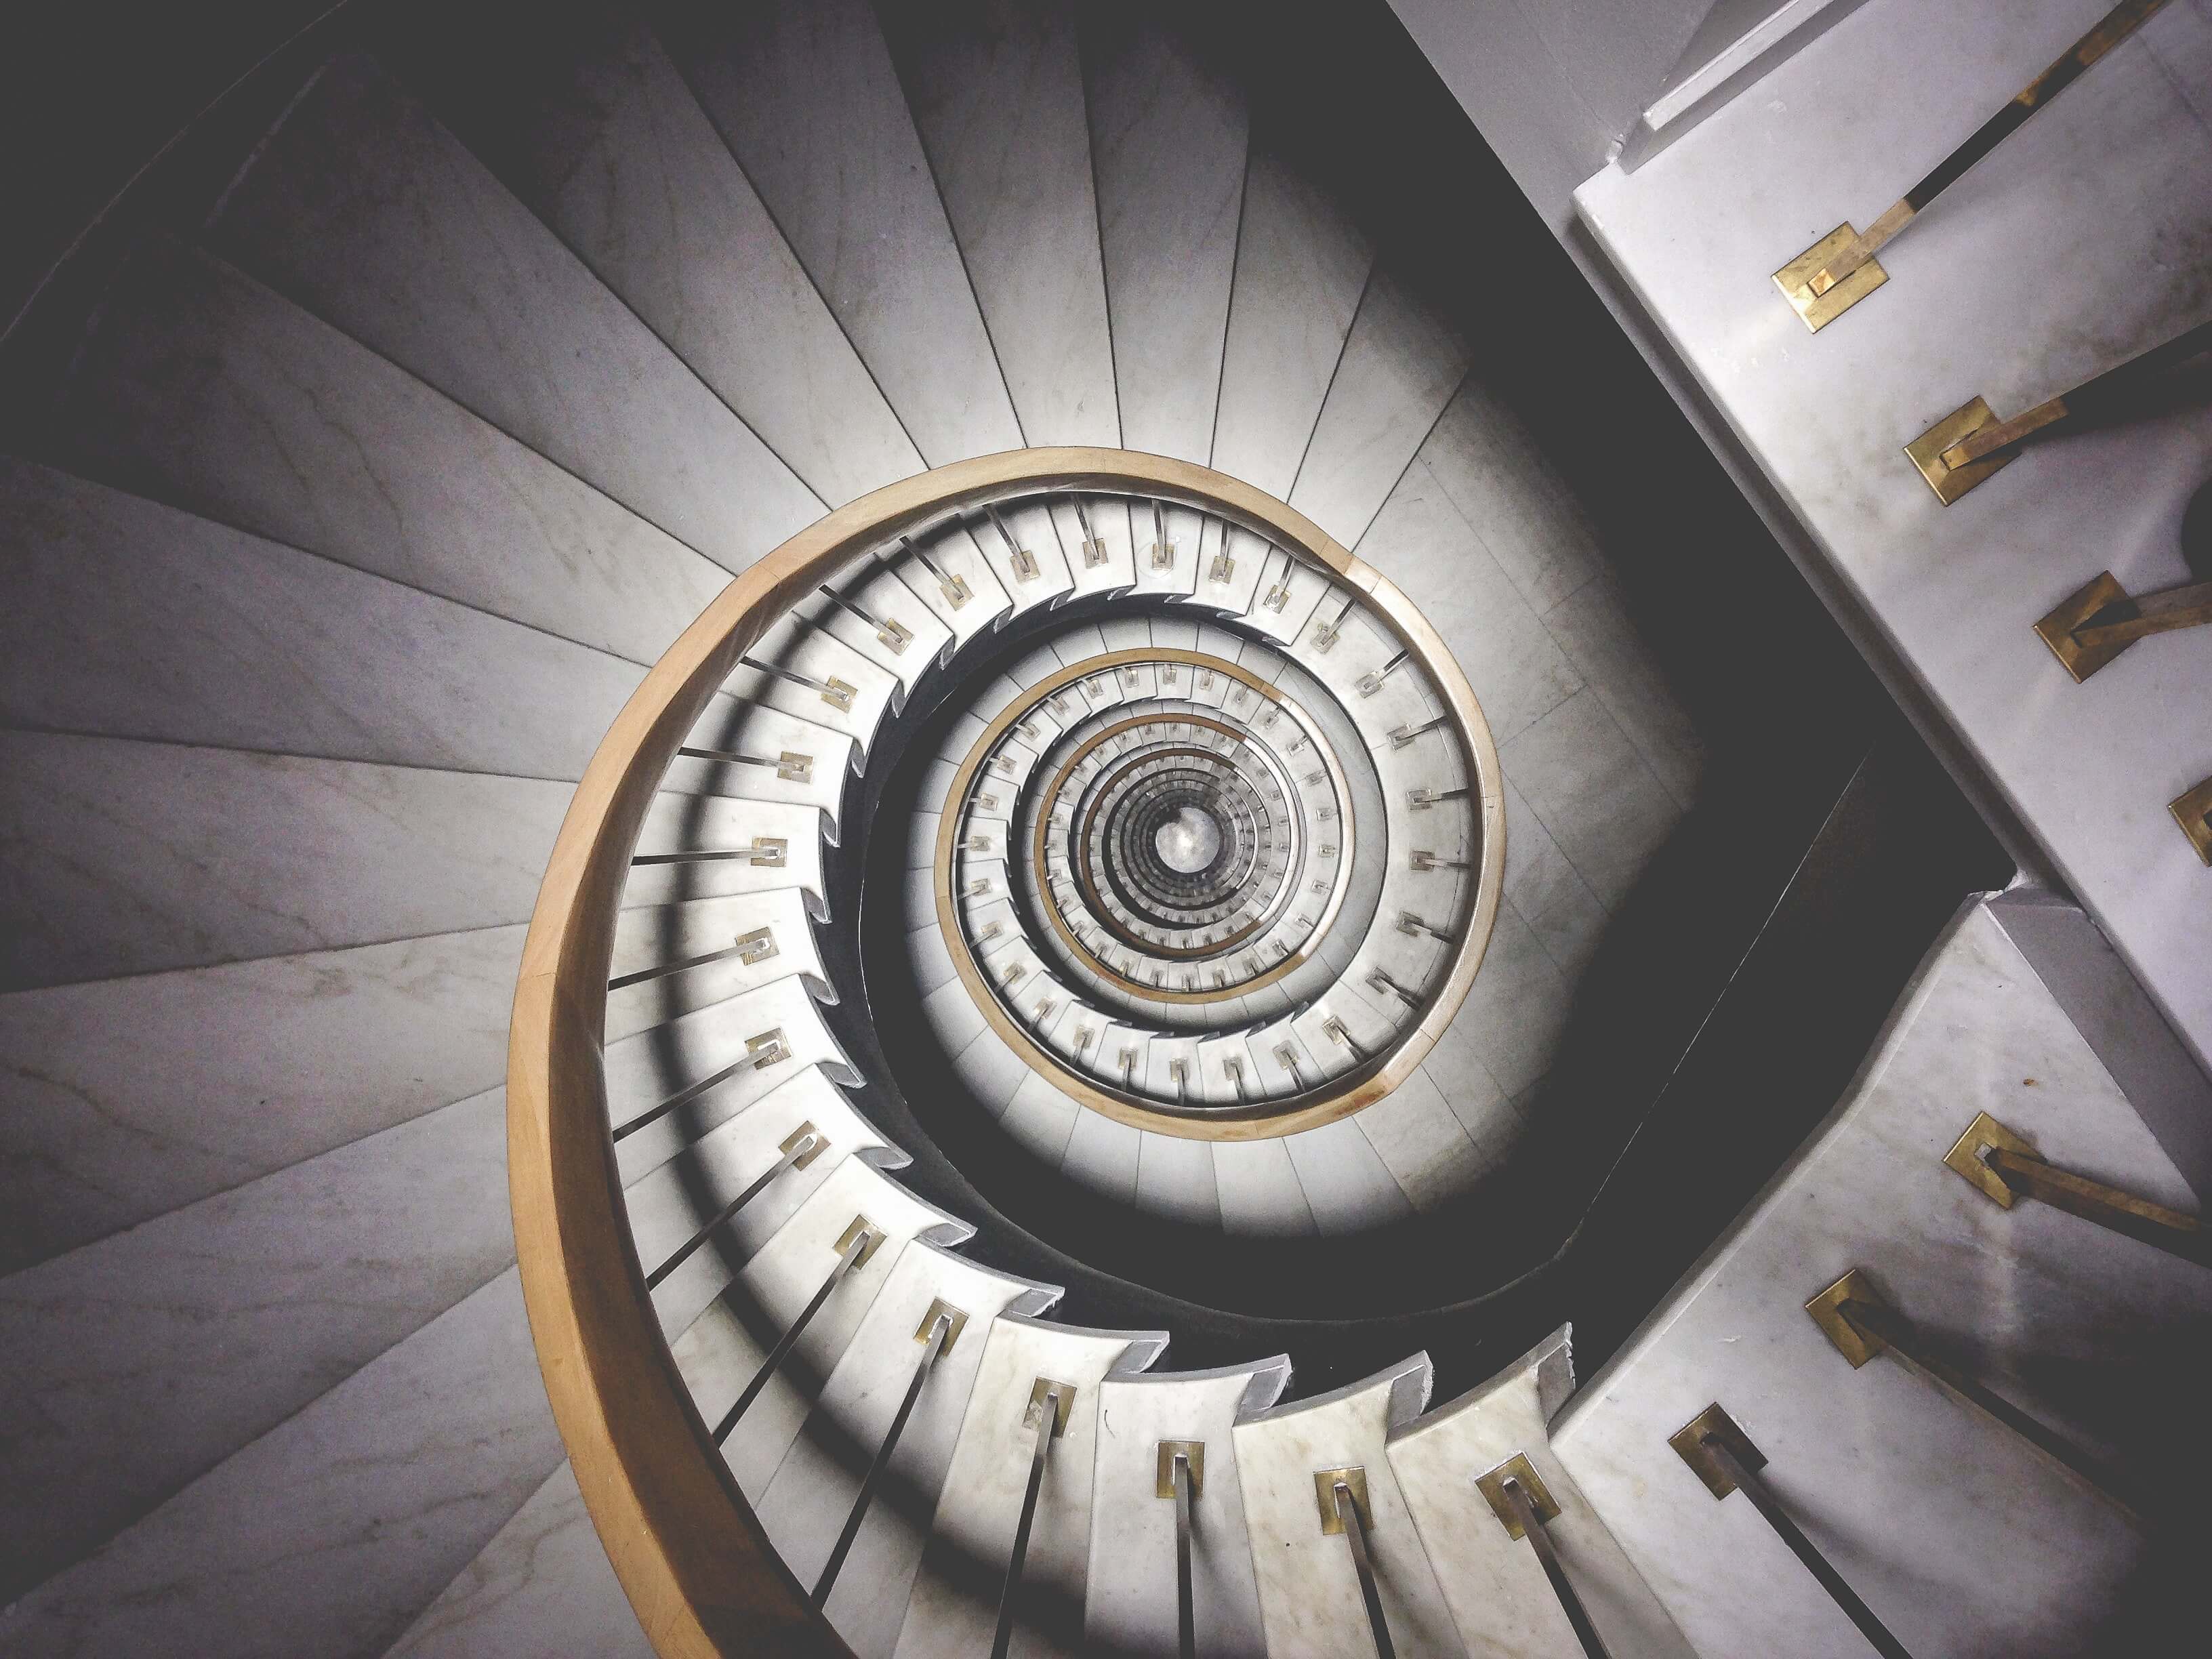 A shot from above of a spiral staircase